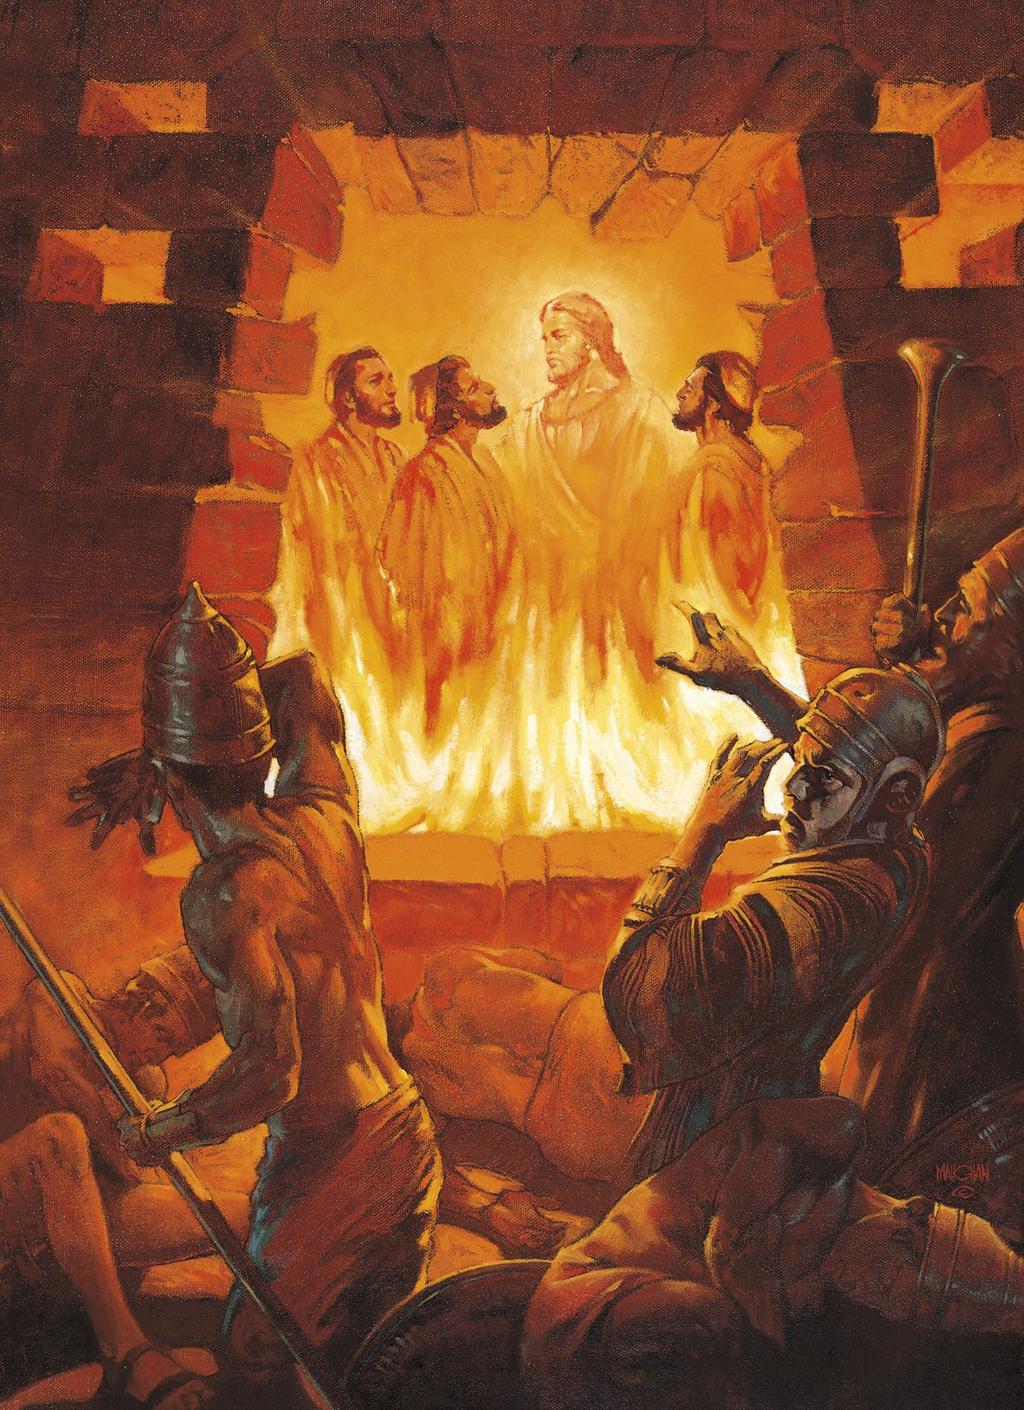 Dan 3 Shadrach, Meshach, and Abed-nego thrown in a furnace The